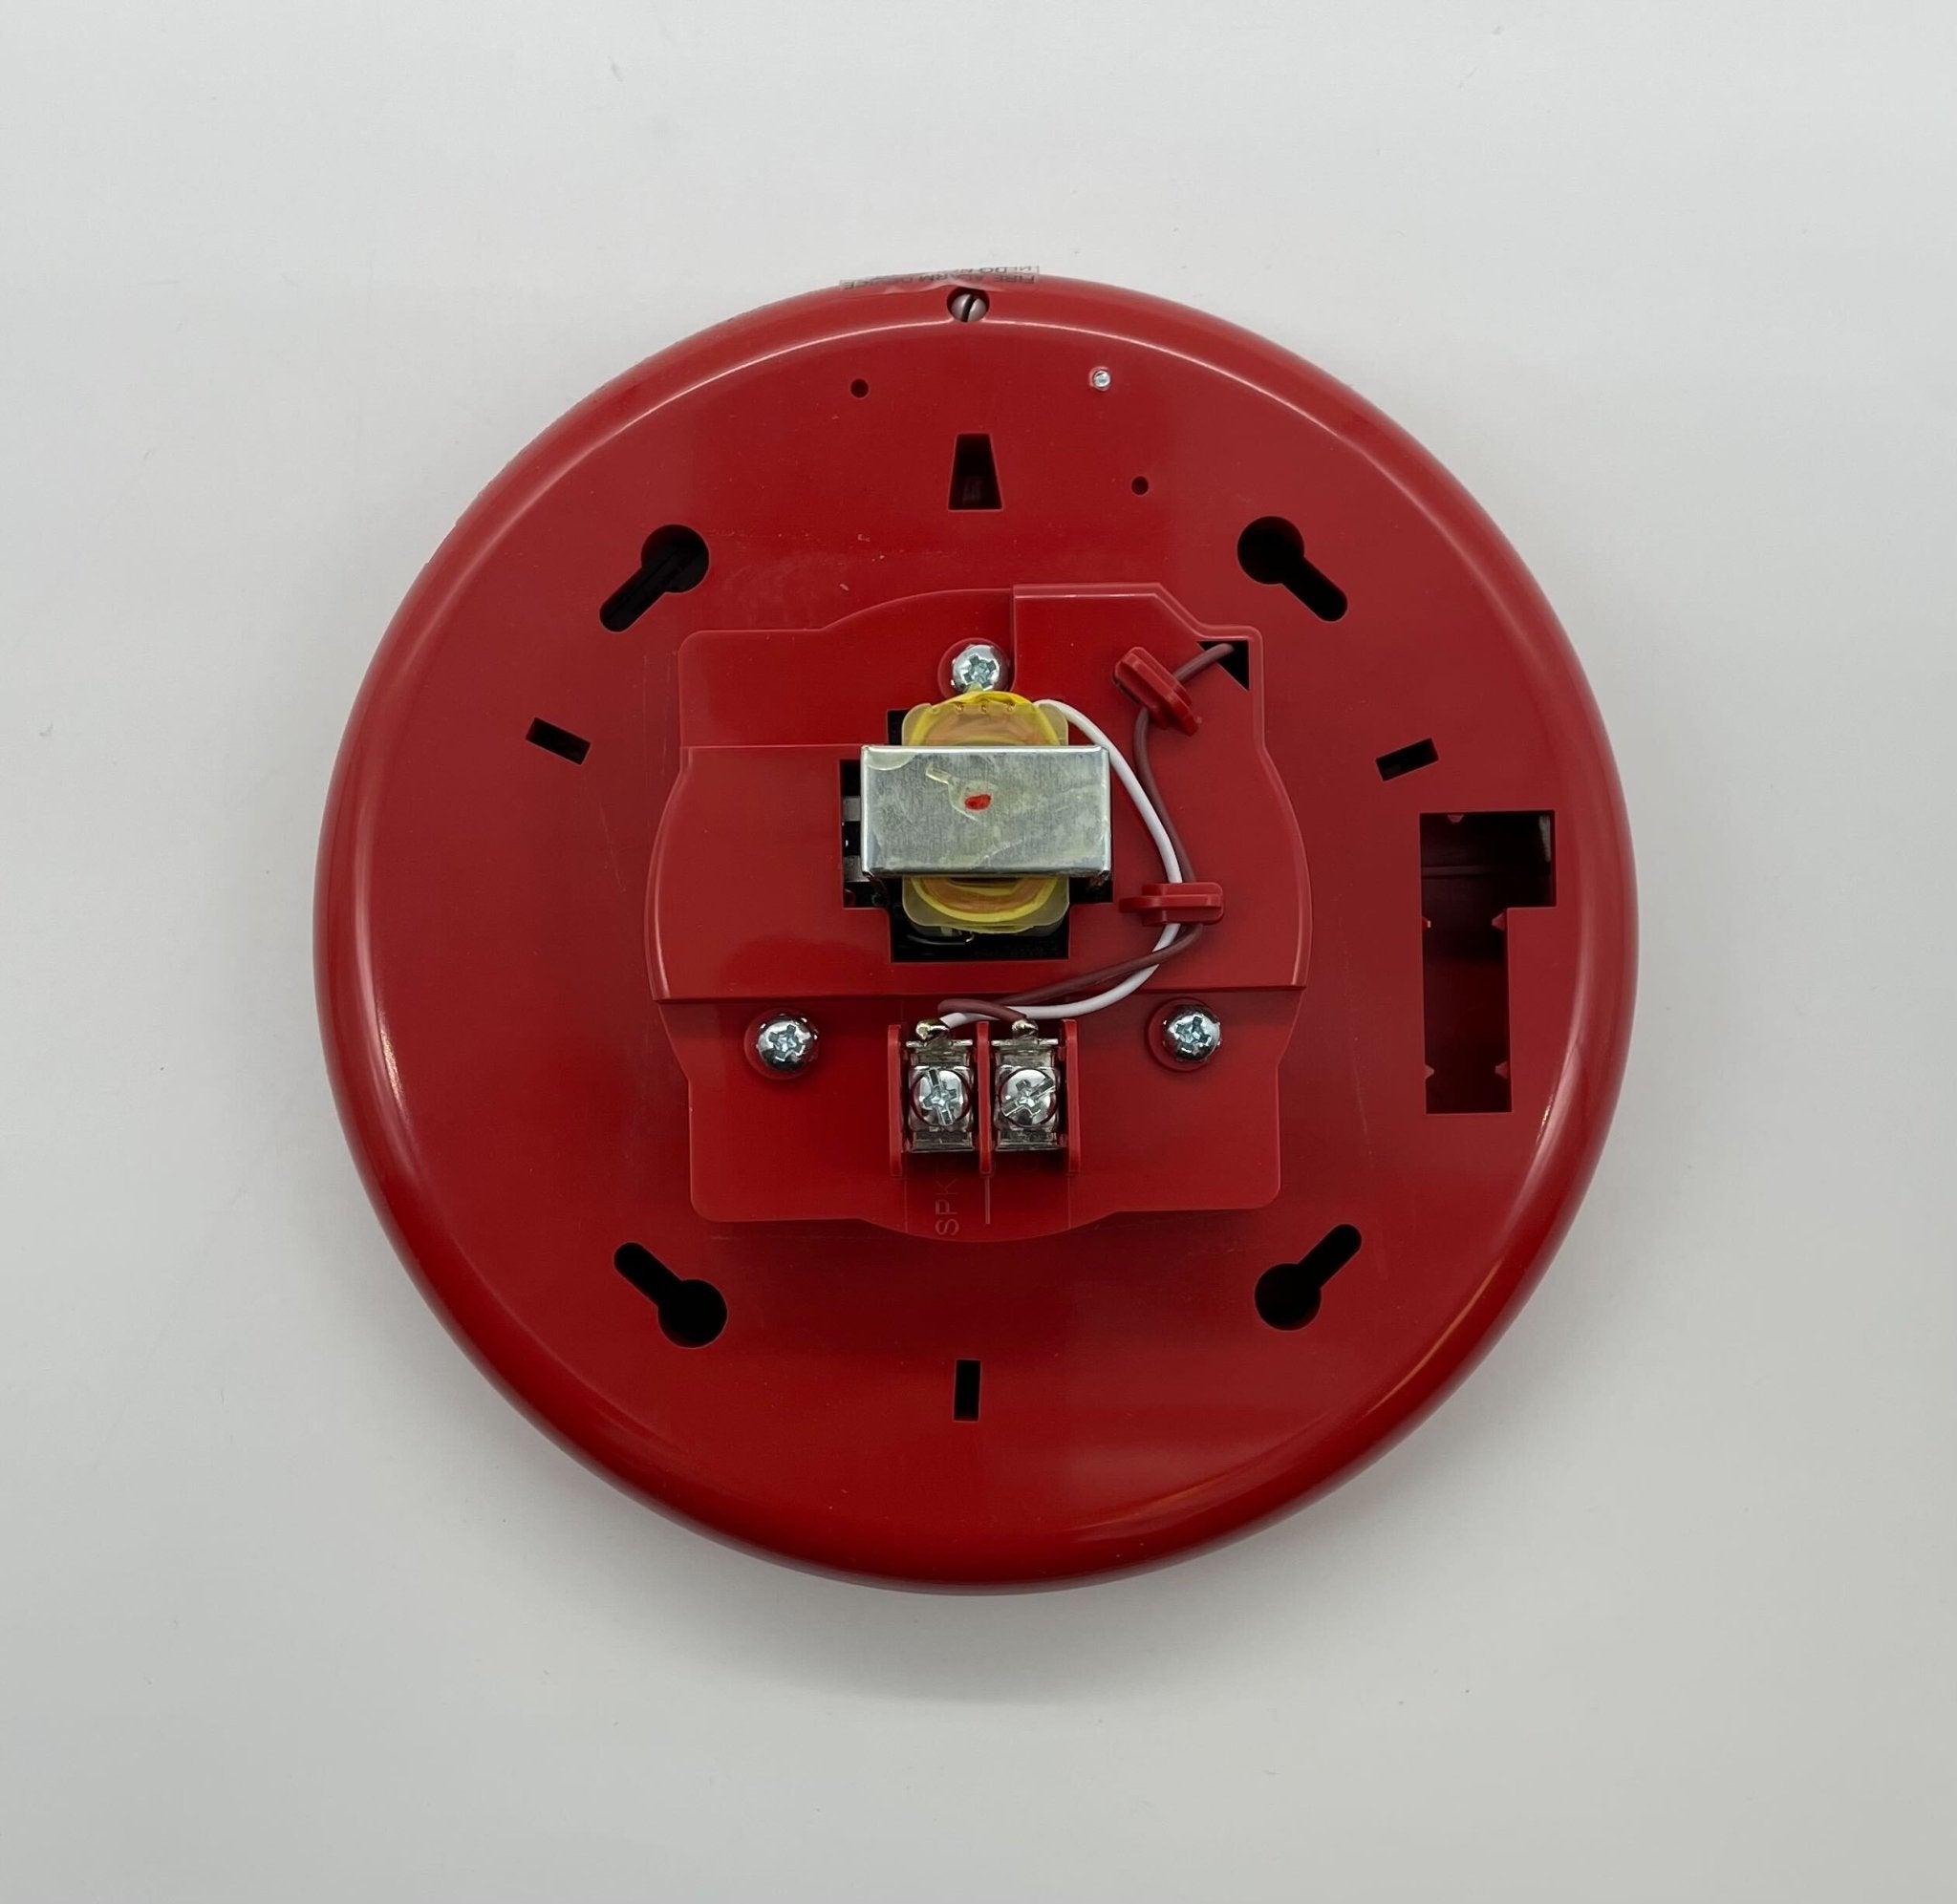 Edwards GCHFRF-S2 - The Fire Alarm Supplier